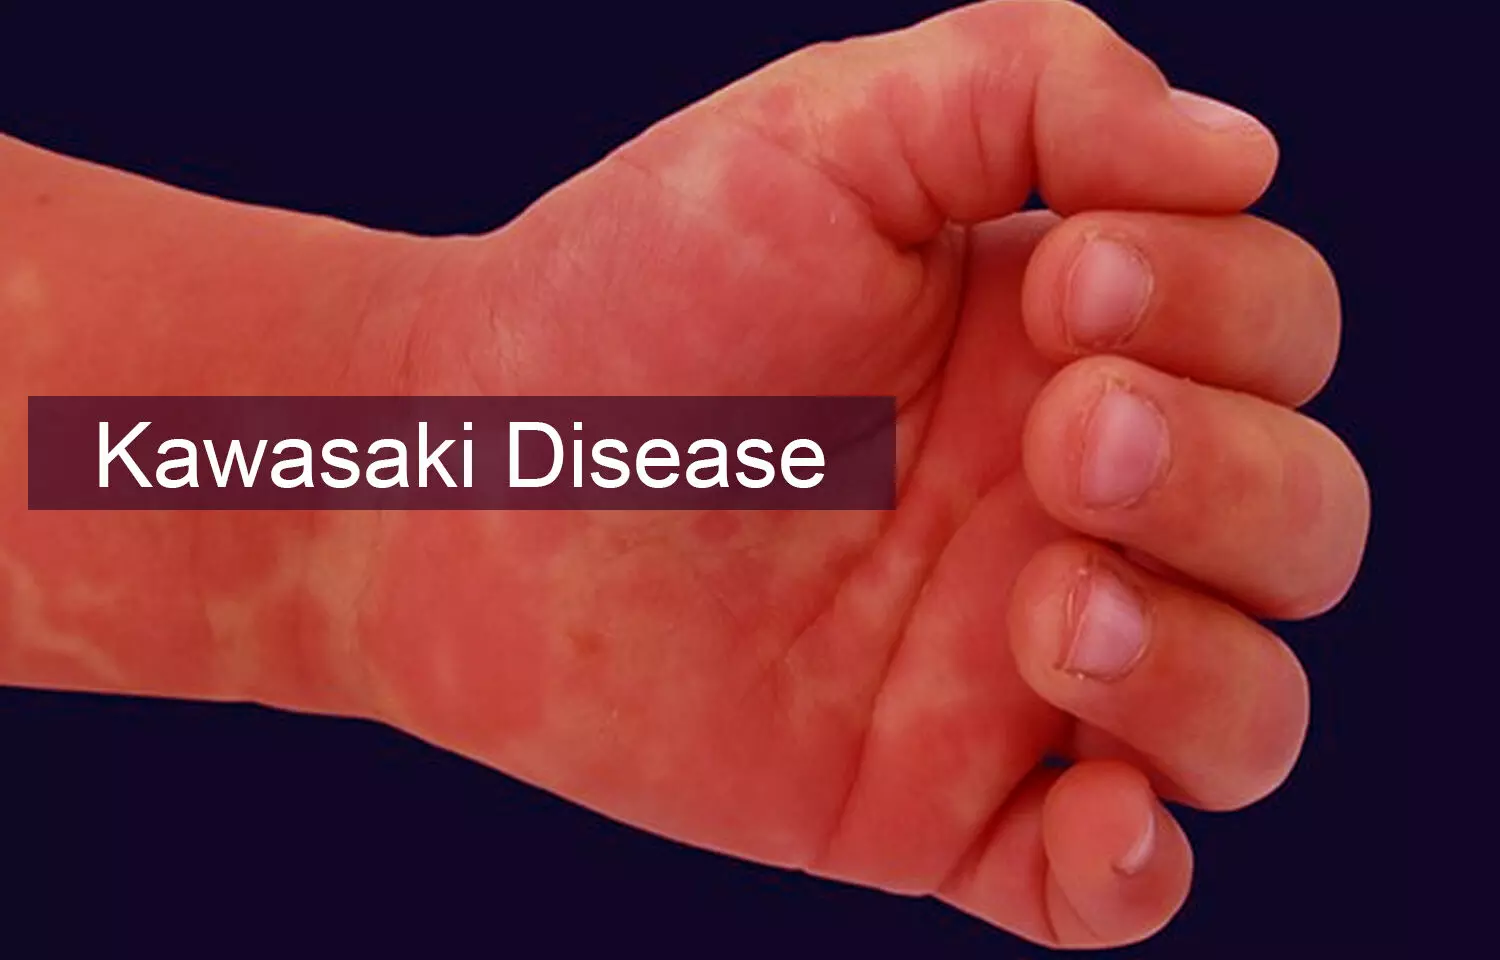 Children with Kawasaki Disease at higher risk for heart problems 10 years later